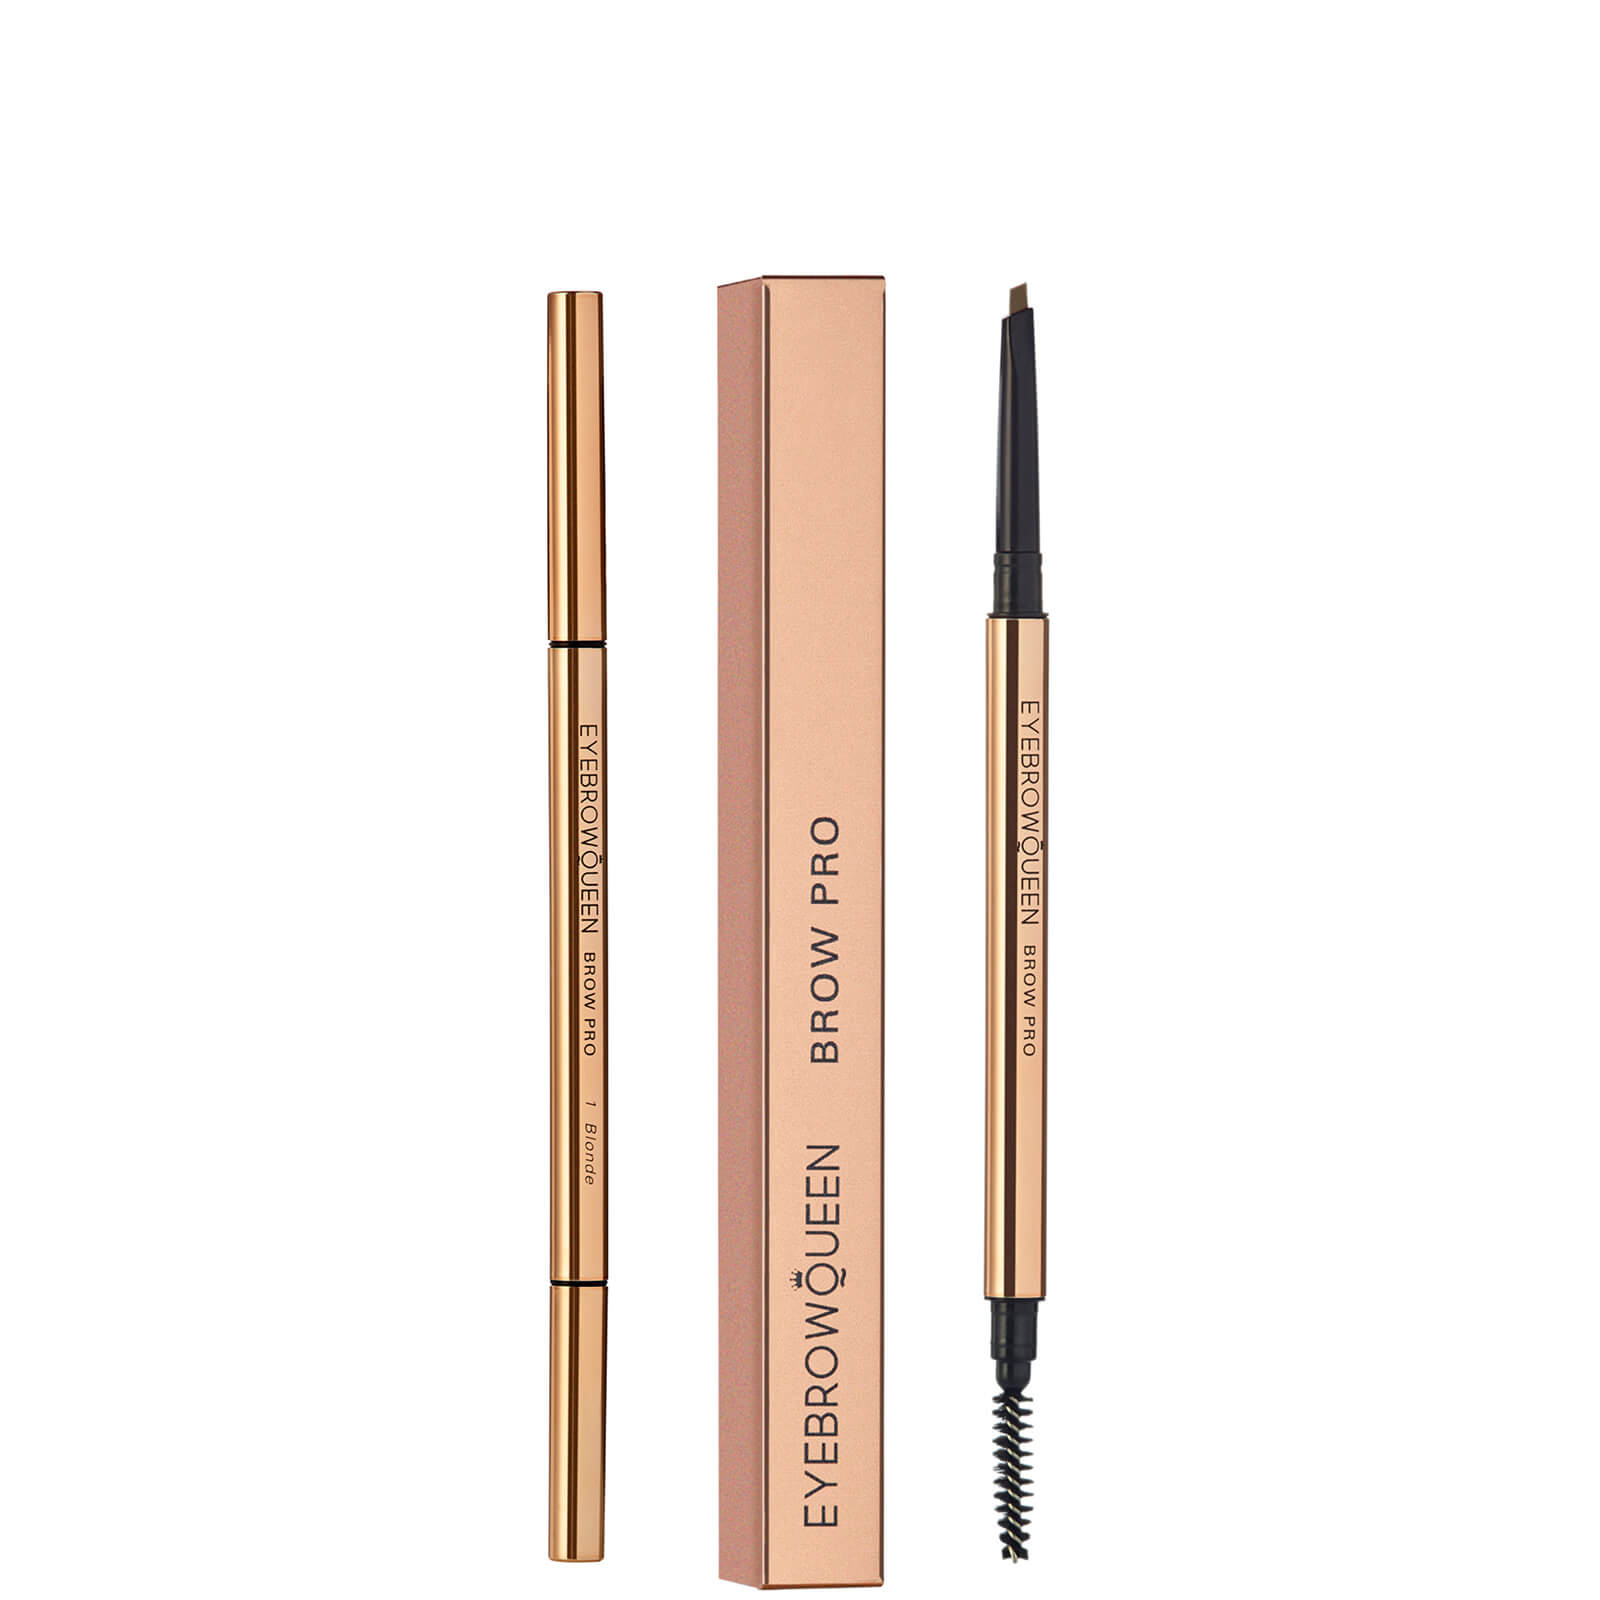 Image of Brow Pro Pencil EyebrowQueen 0,05g (varie tonalità) - Blonde